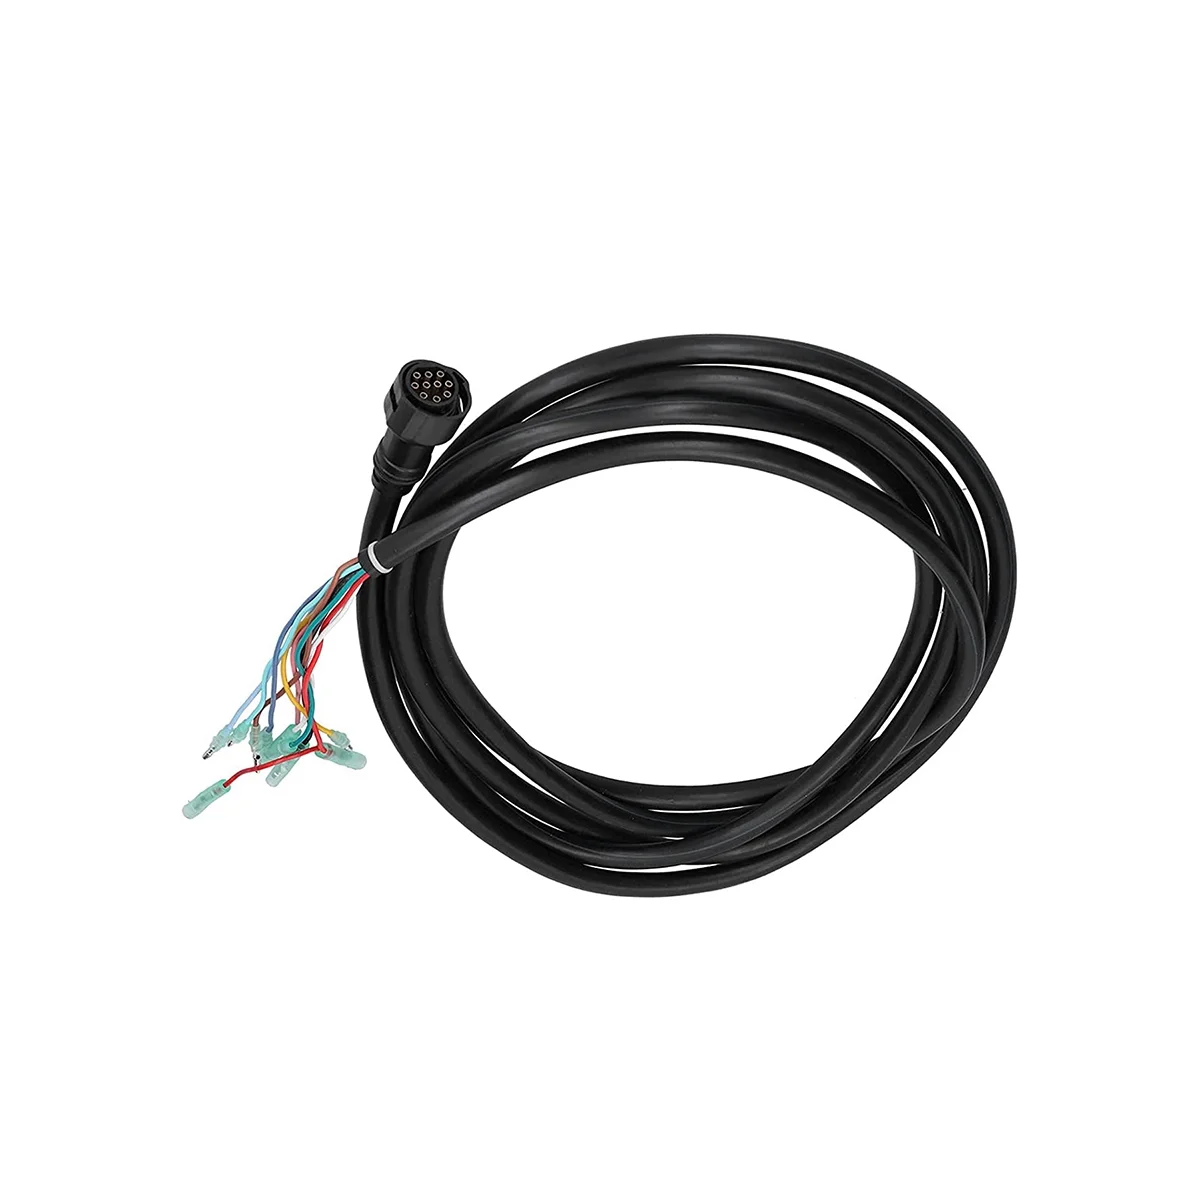 5m-16ft-10-pin-main-wire-harness-extension-cable-688‑8258a‑20‑00-replacement-for-yamaha-outboard-engine-703-control-box